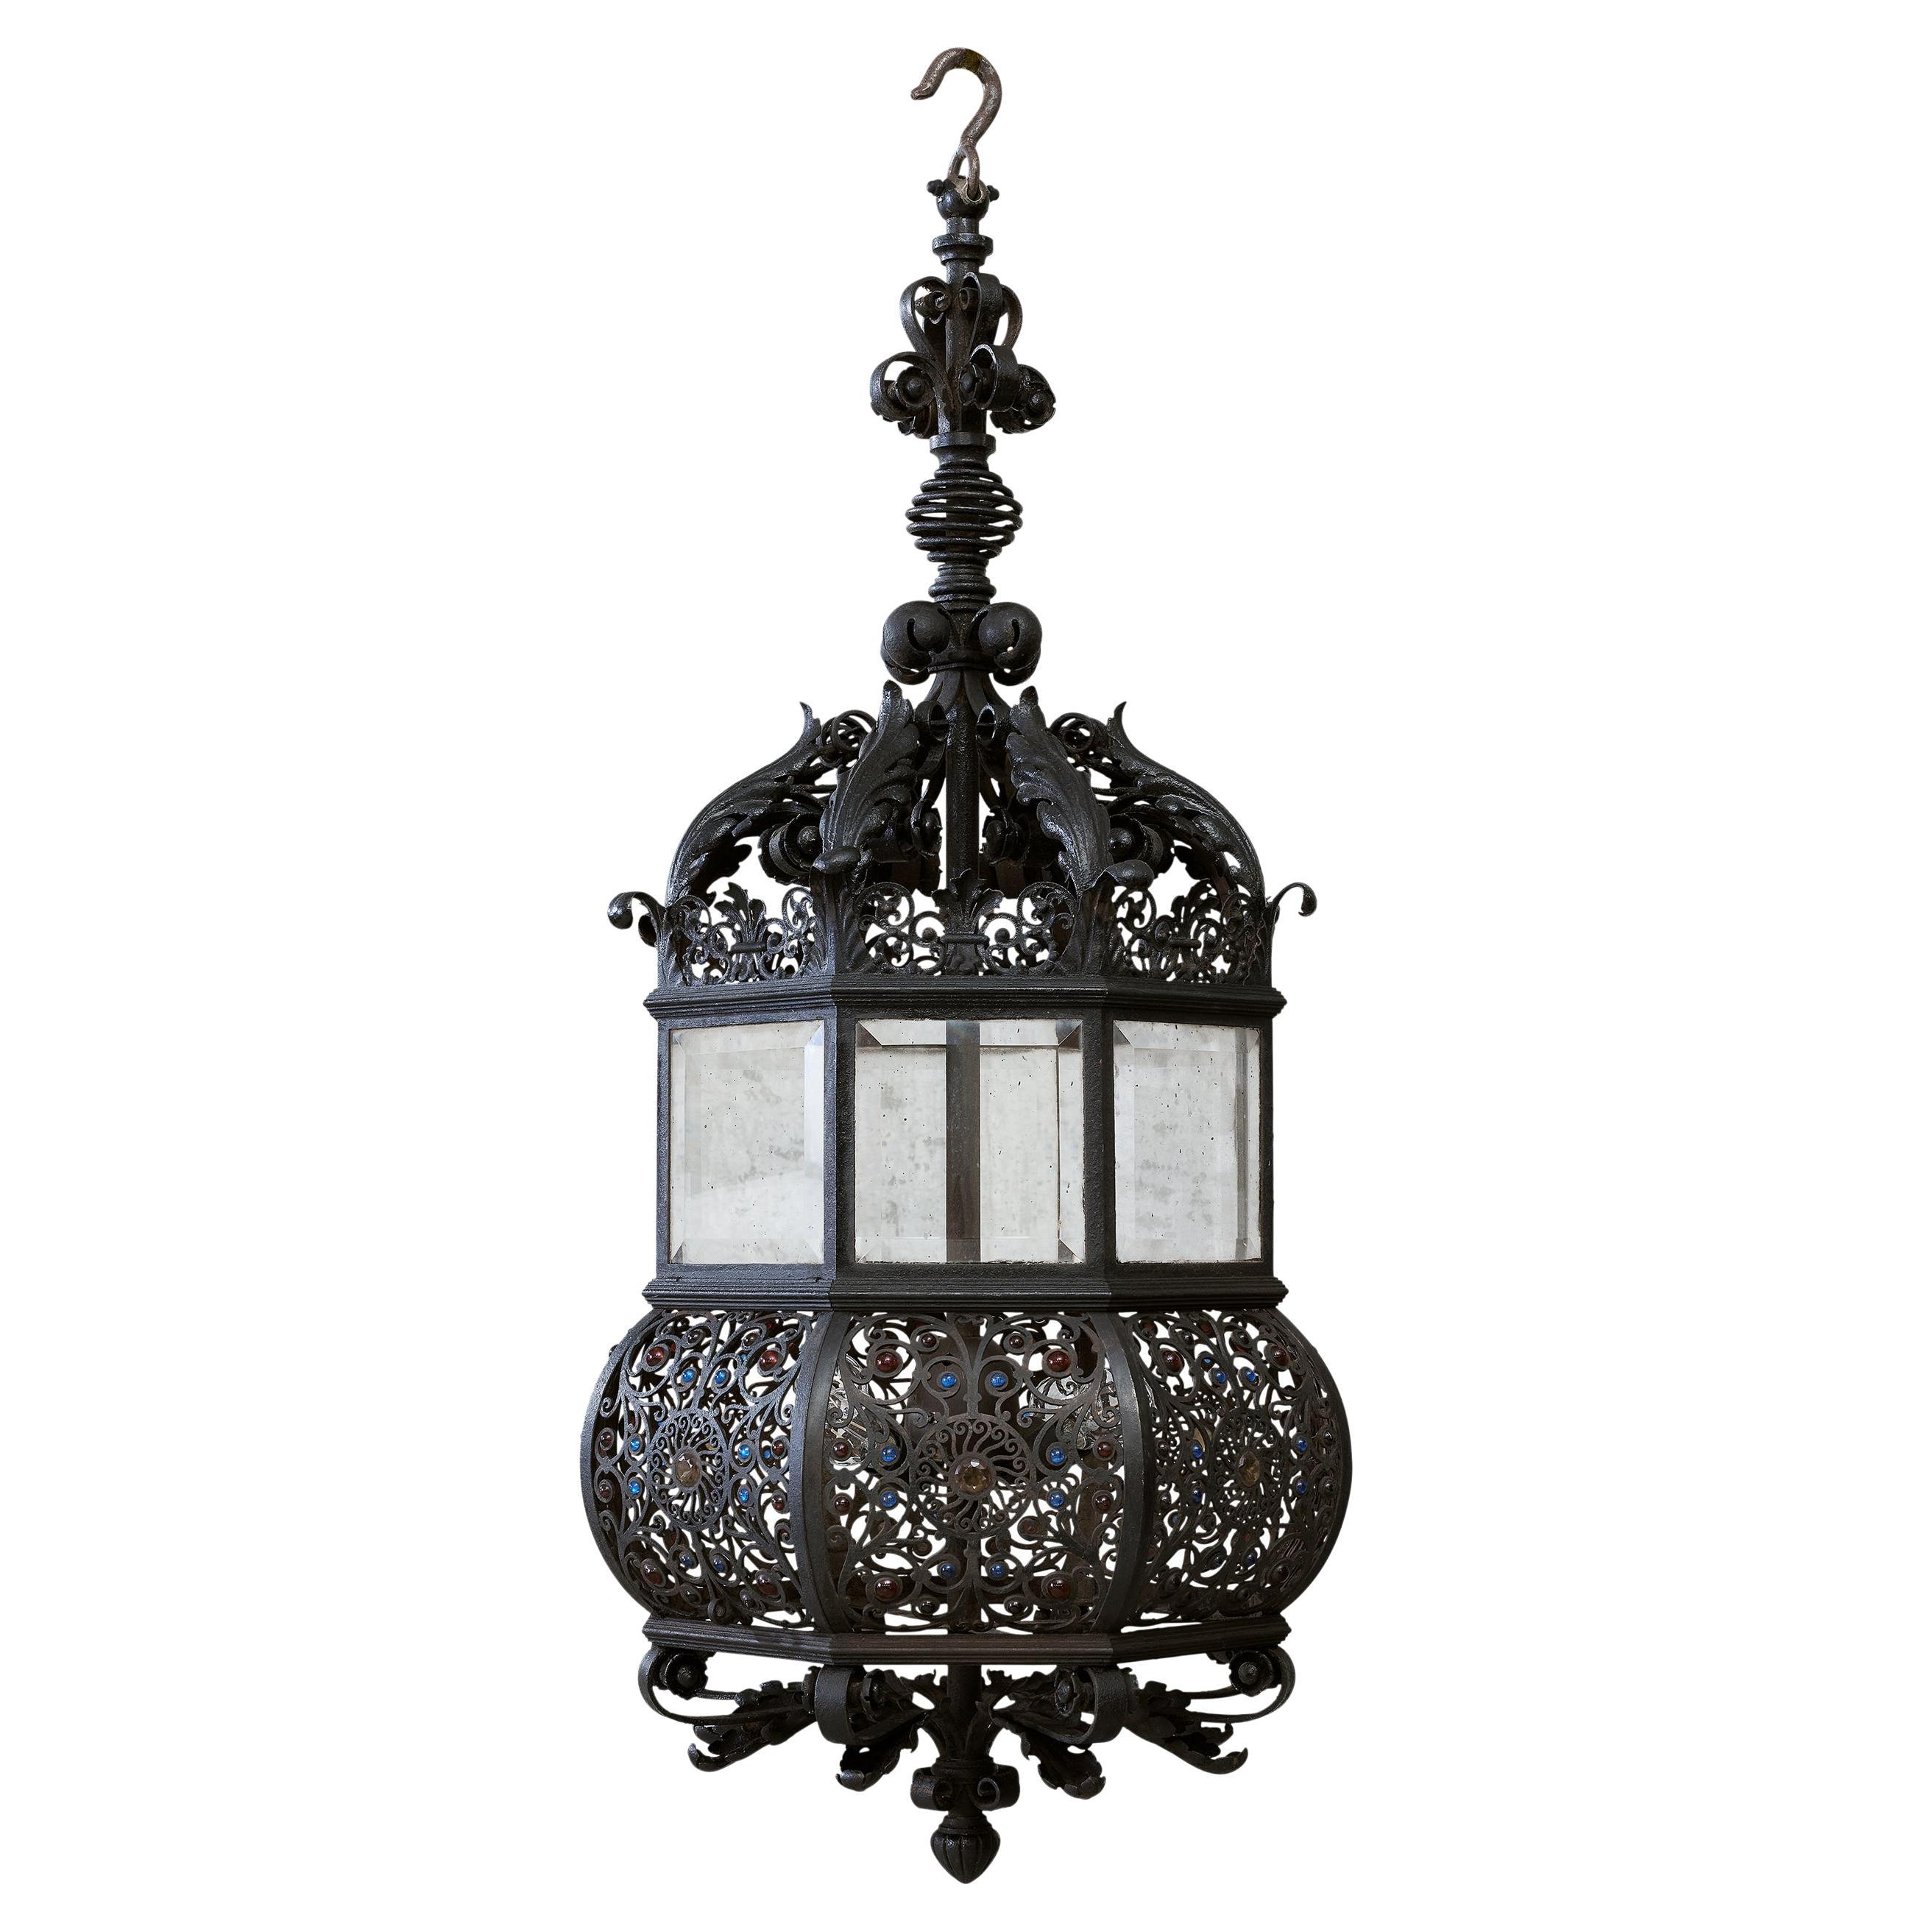 A Fine Wrought Iron And Glass Four-Light Hanging Lamp